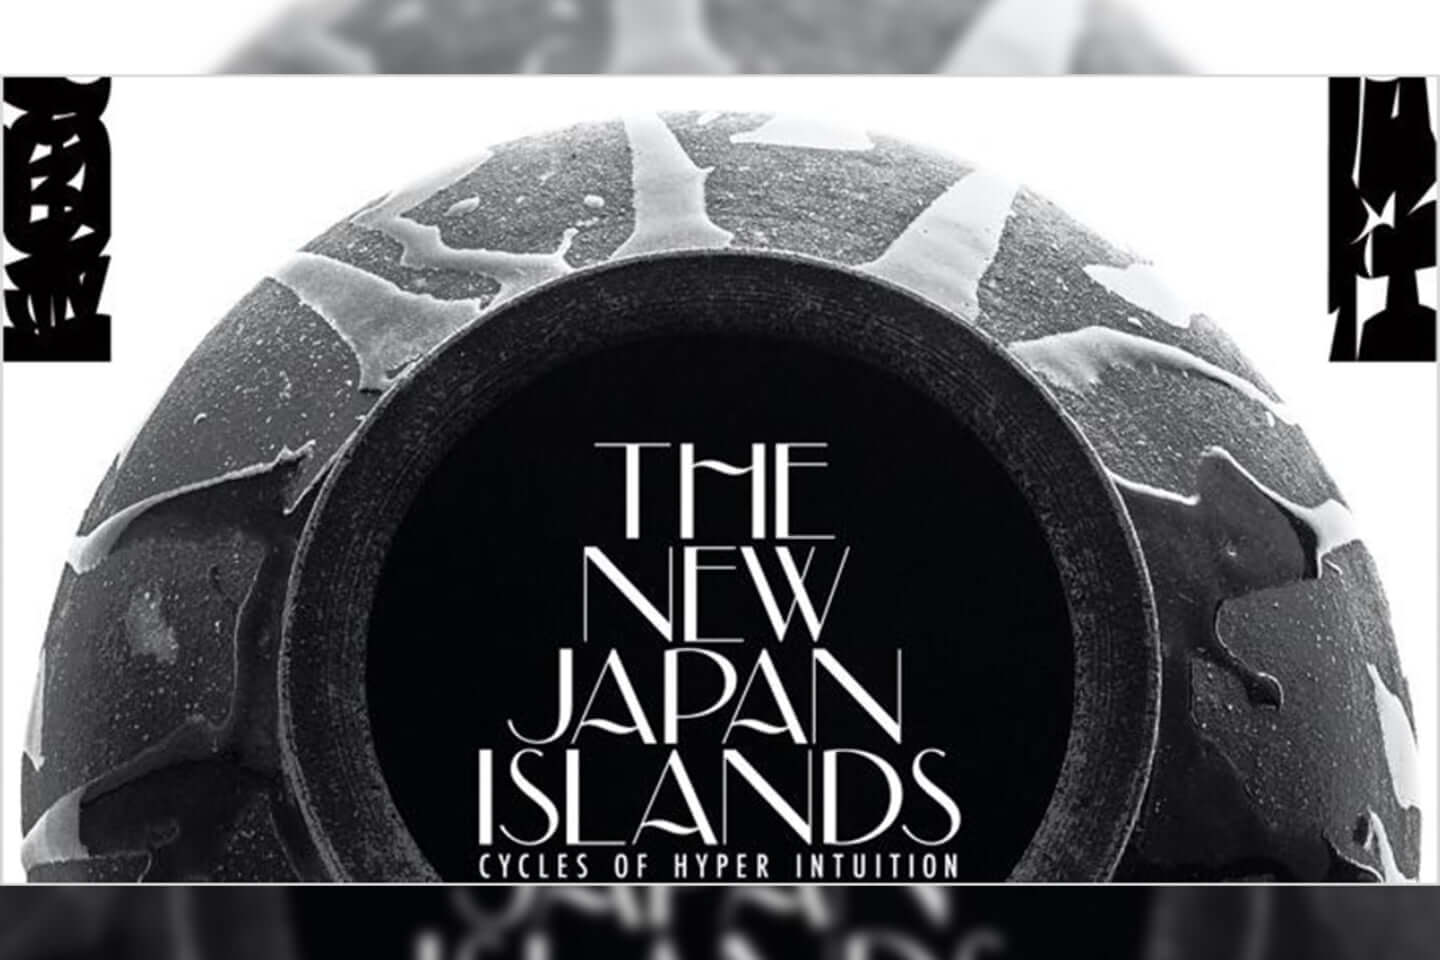 The New Japan Islands